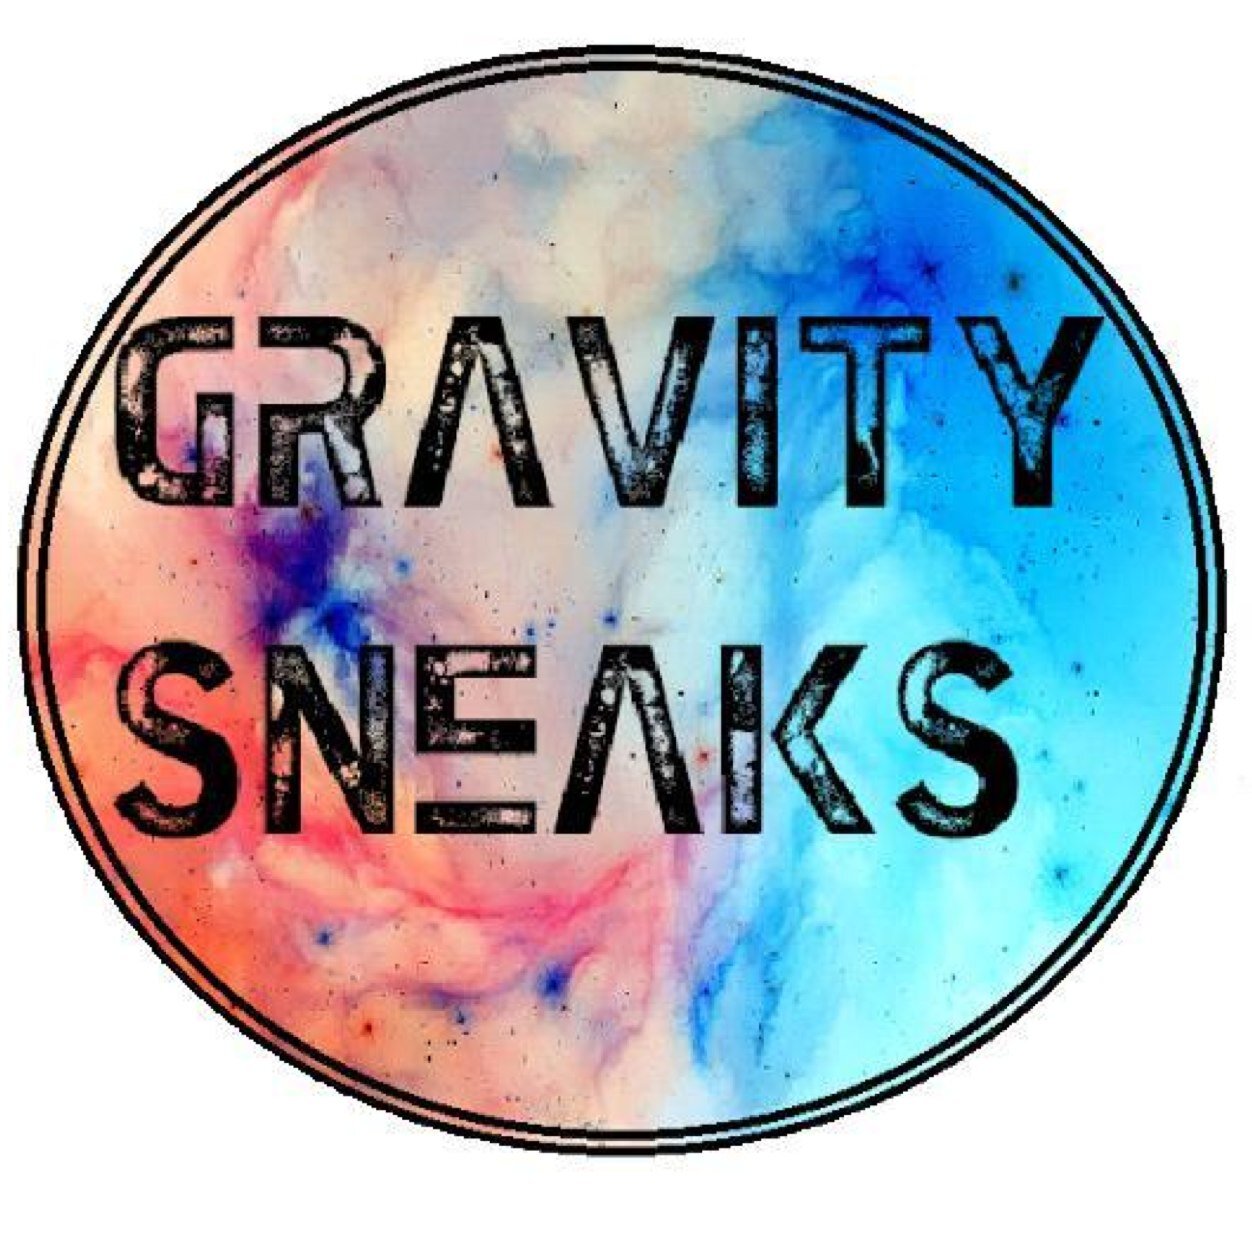 Gravity Sneaks is your #1 source for all the latest kicks and launch information~customer satisfaction is our priority Contact us at gravitysneaks@gmail.com